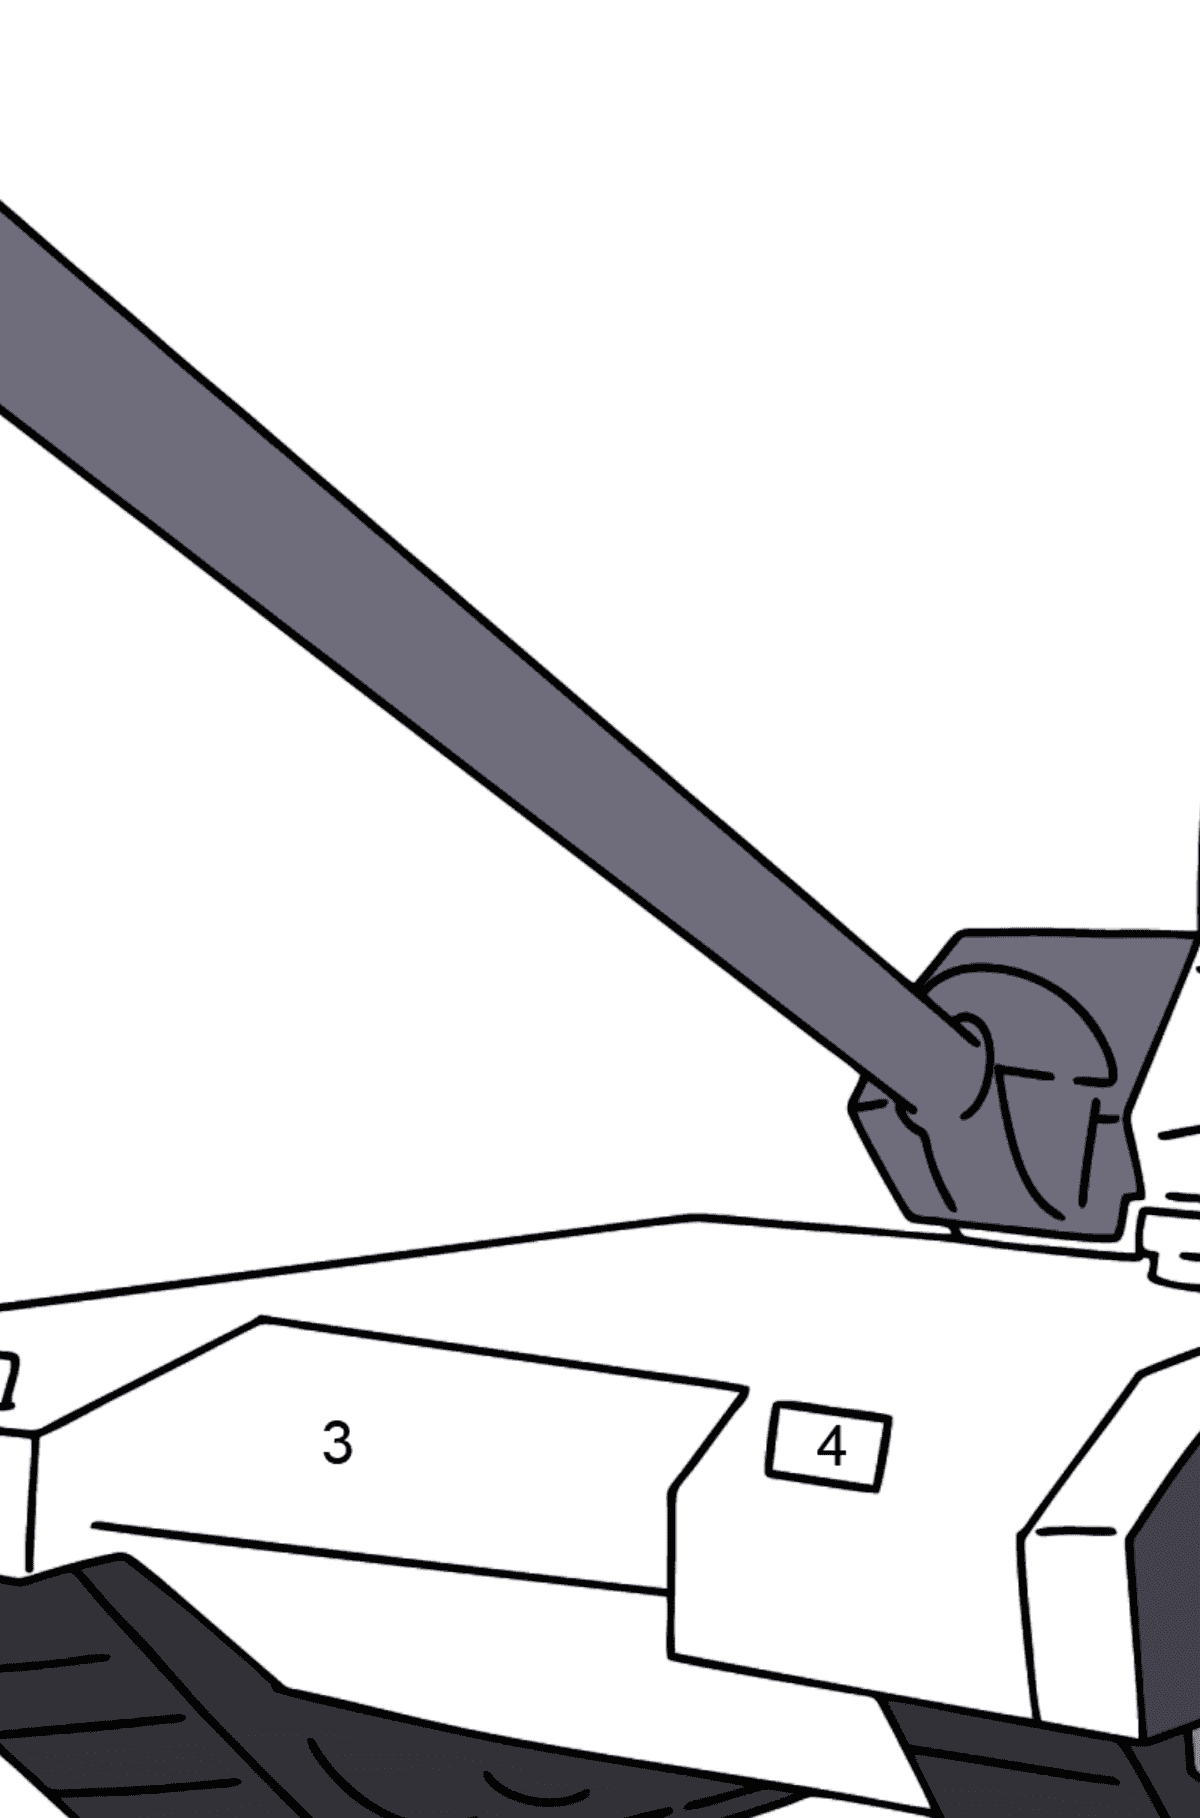 Armata Tank coloring page - Coloring by Numbers for Kids